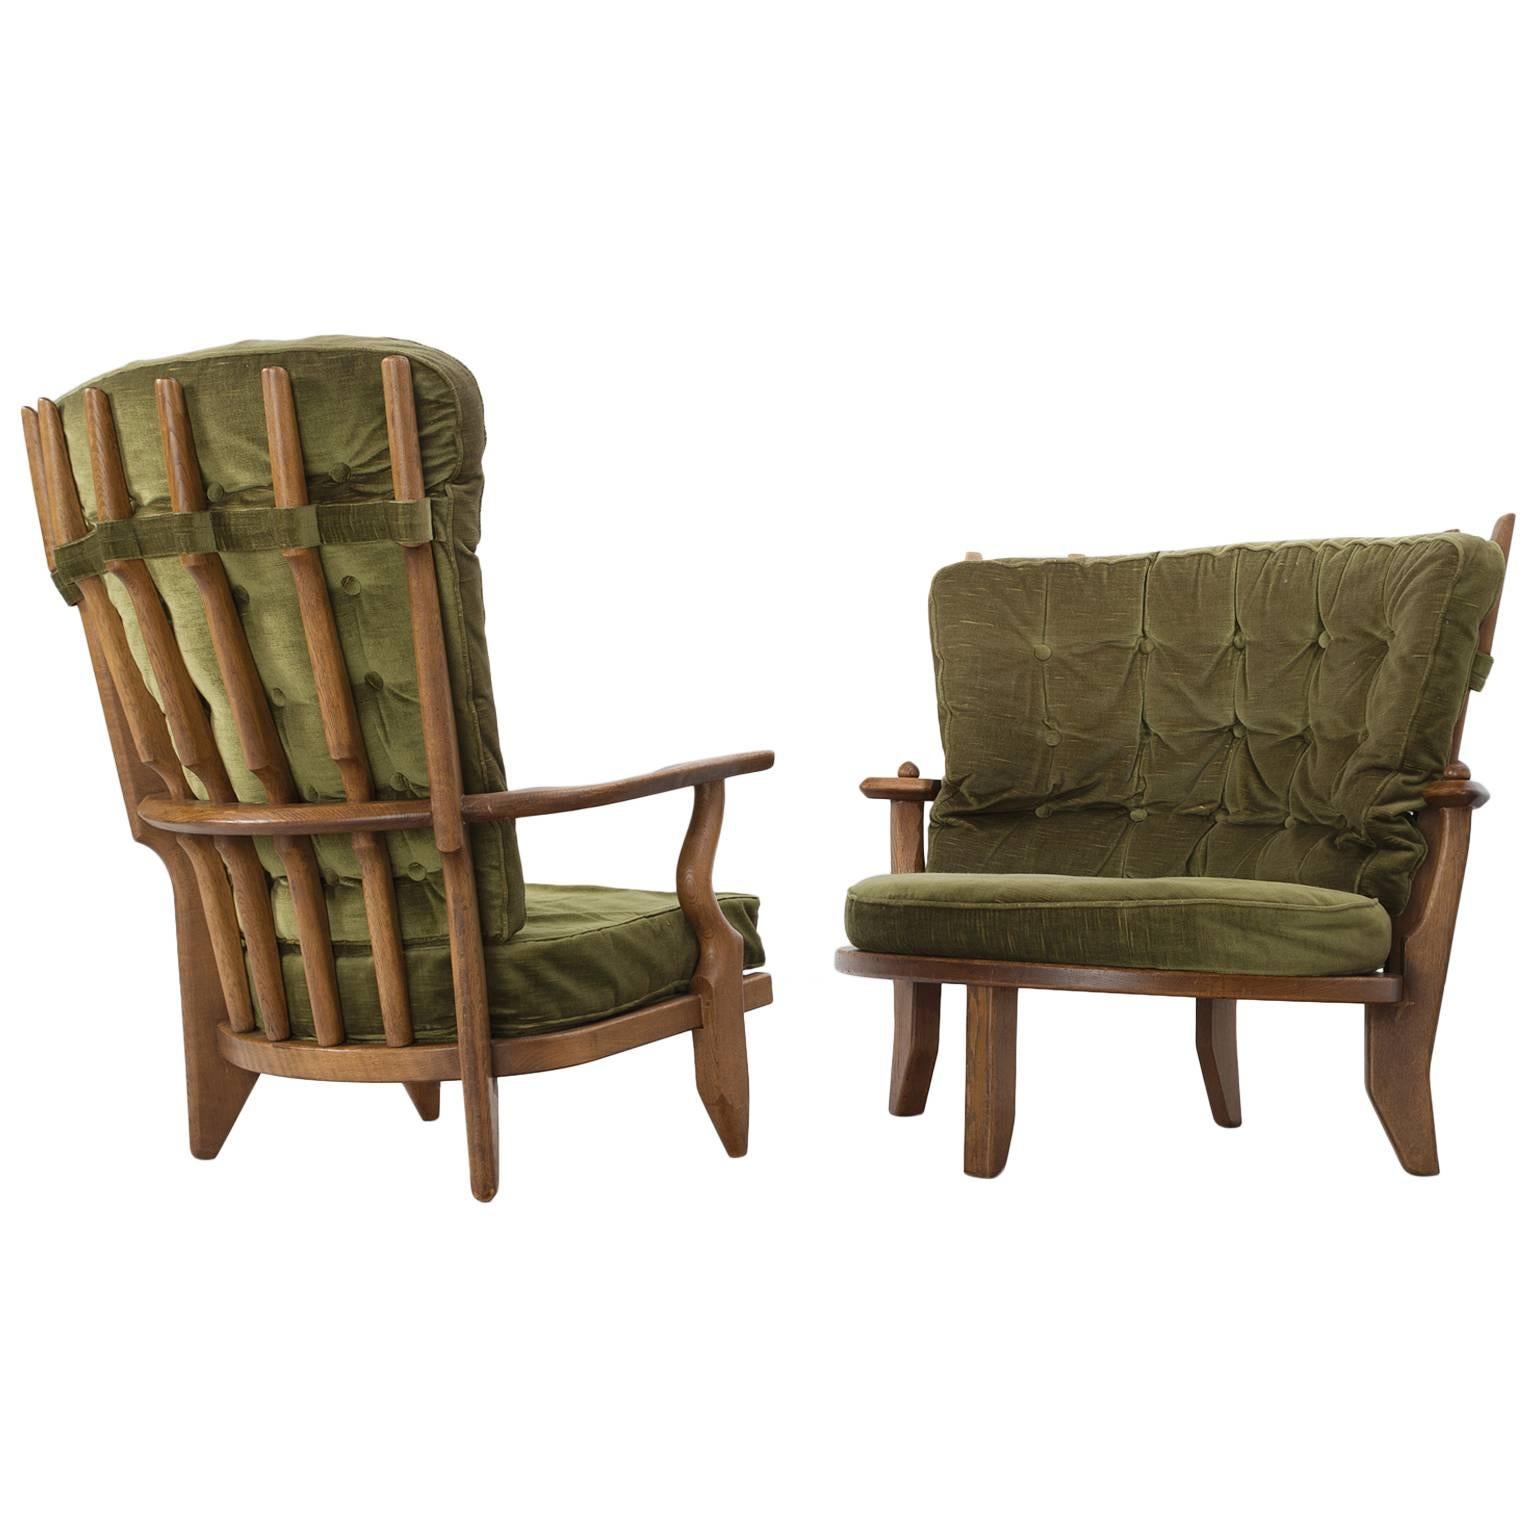 Guillerme & Chambron Set of Two Lounge Chairs with Green Upholstery